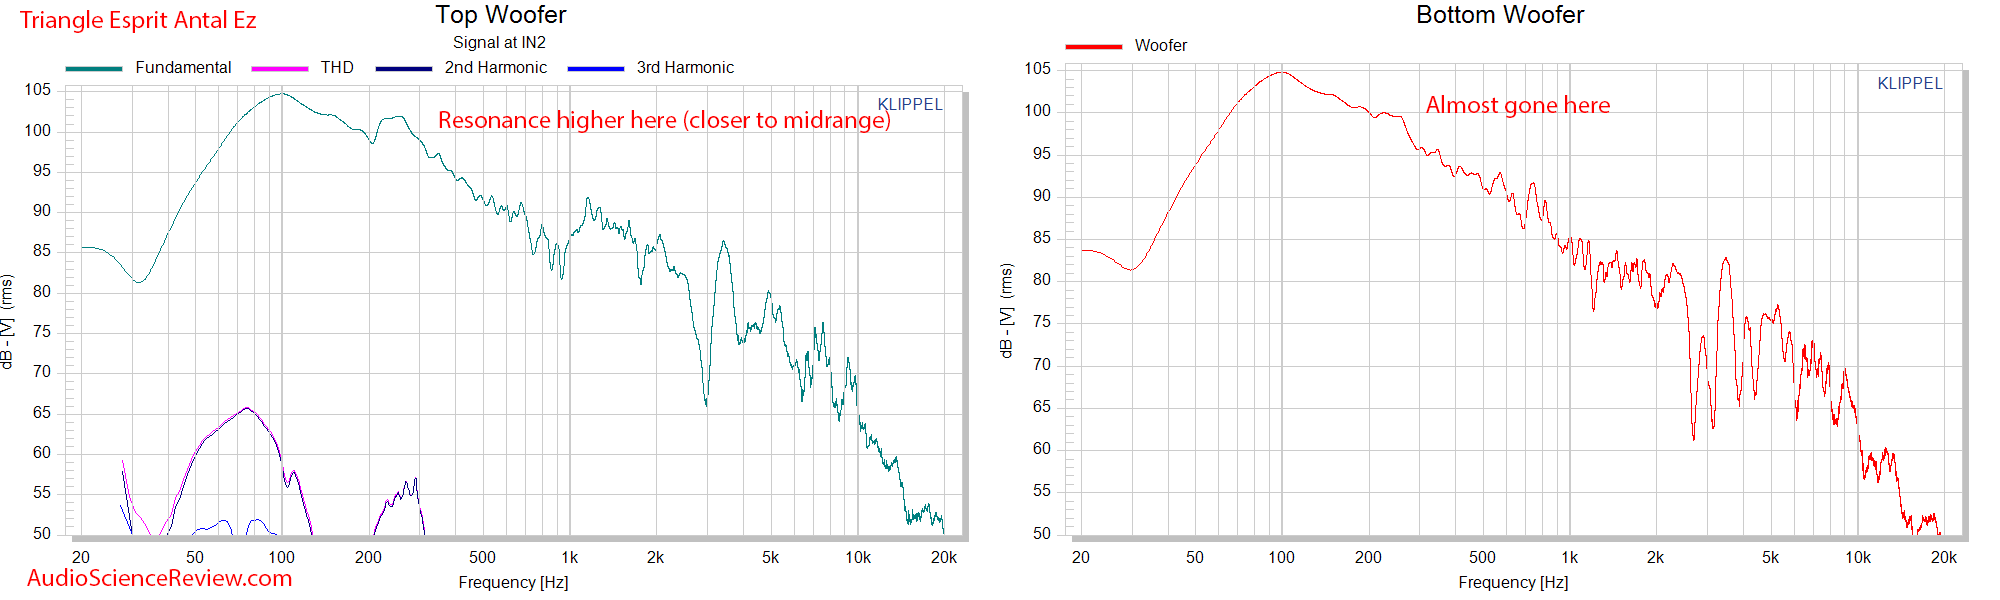 Triangle Esprit Antal Ez  Woofer Frequency Response Measurements.png